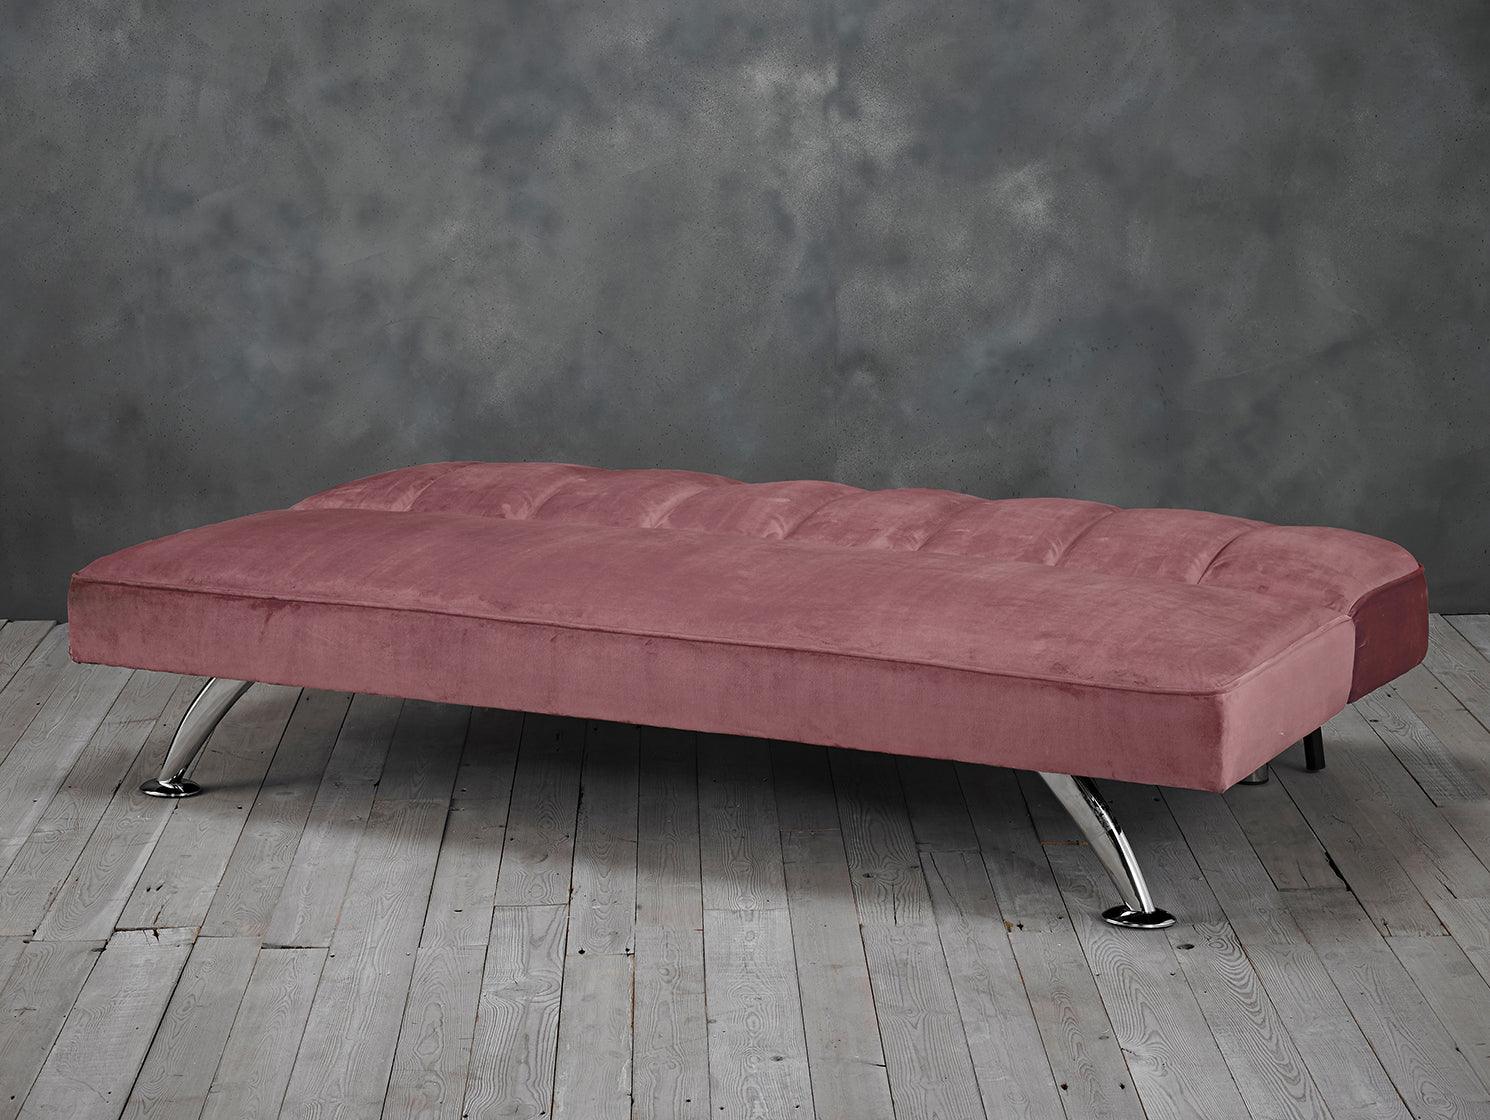 Brighton Sofa Bed Pink - loveyourbed.co.uk